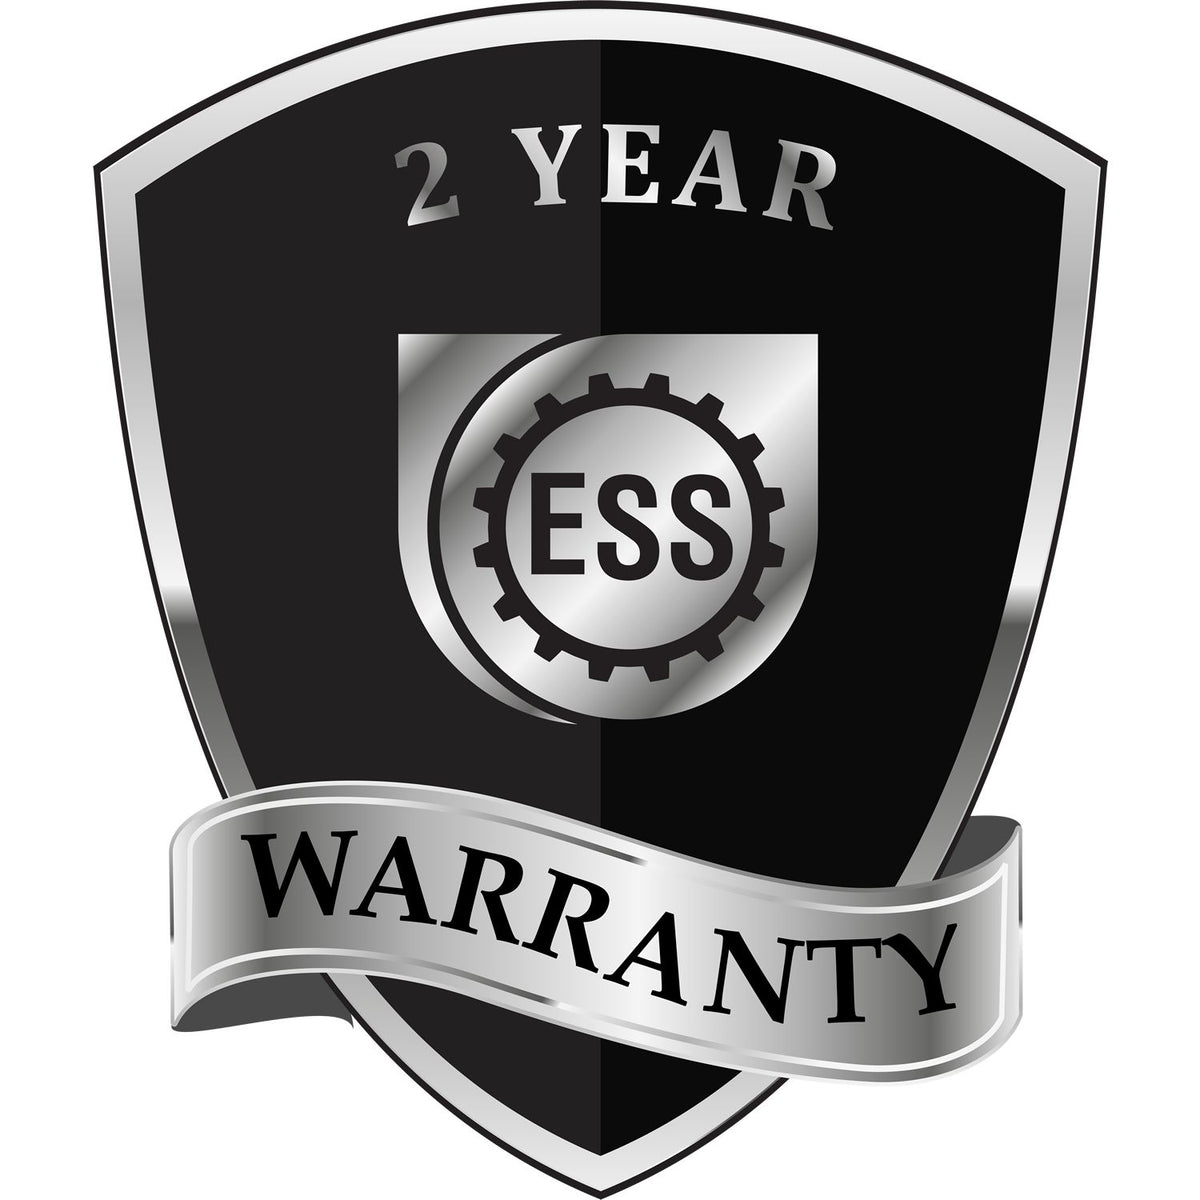 A badge or emblem showing a warranty icon for the New York Desk Architect Embossing Seal